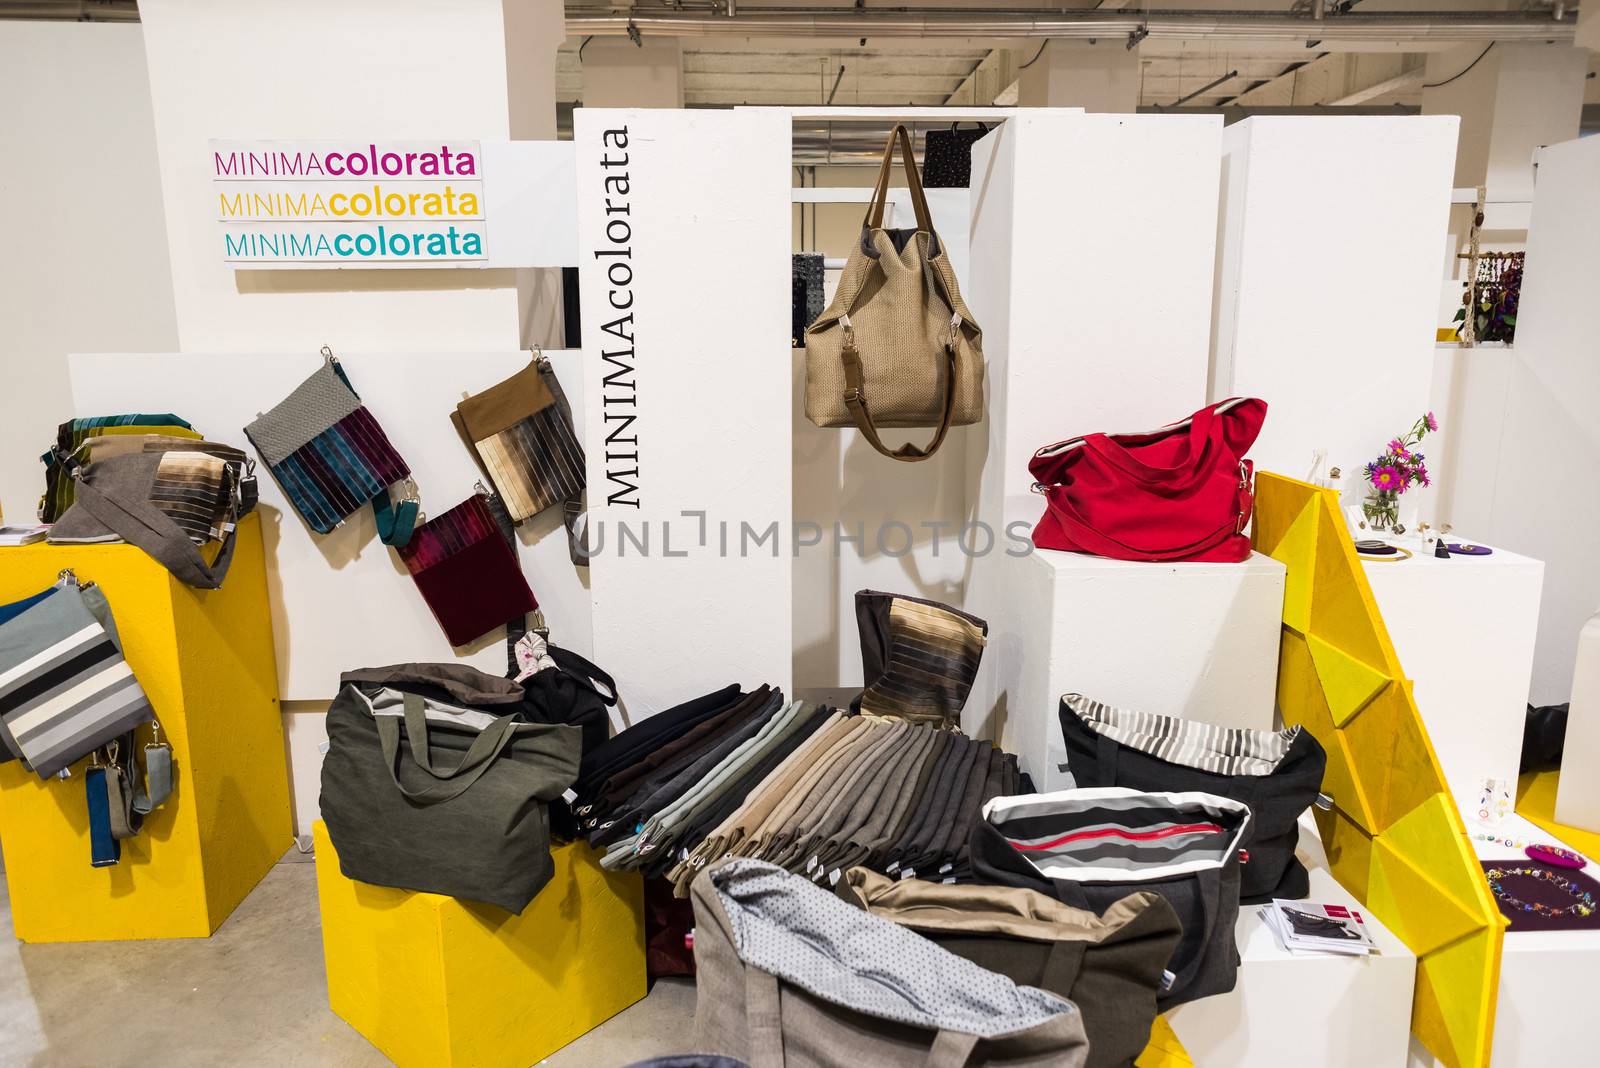 MILAN, ITALY - SEPTEMBER 20: So Critical So Fashion exhibition in Milan on September, 20 2013. Important alternative  fashion exhibition of biologiacal, vegan and recycled materials during Milan Fashion Week